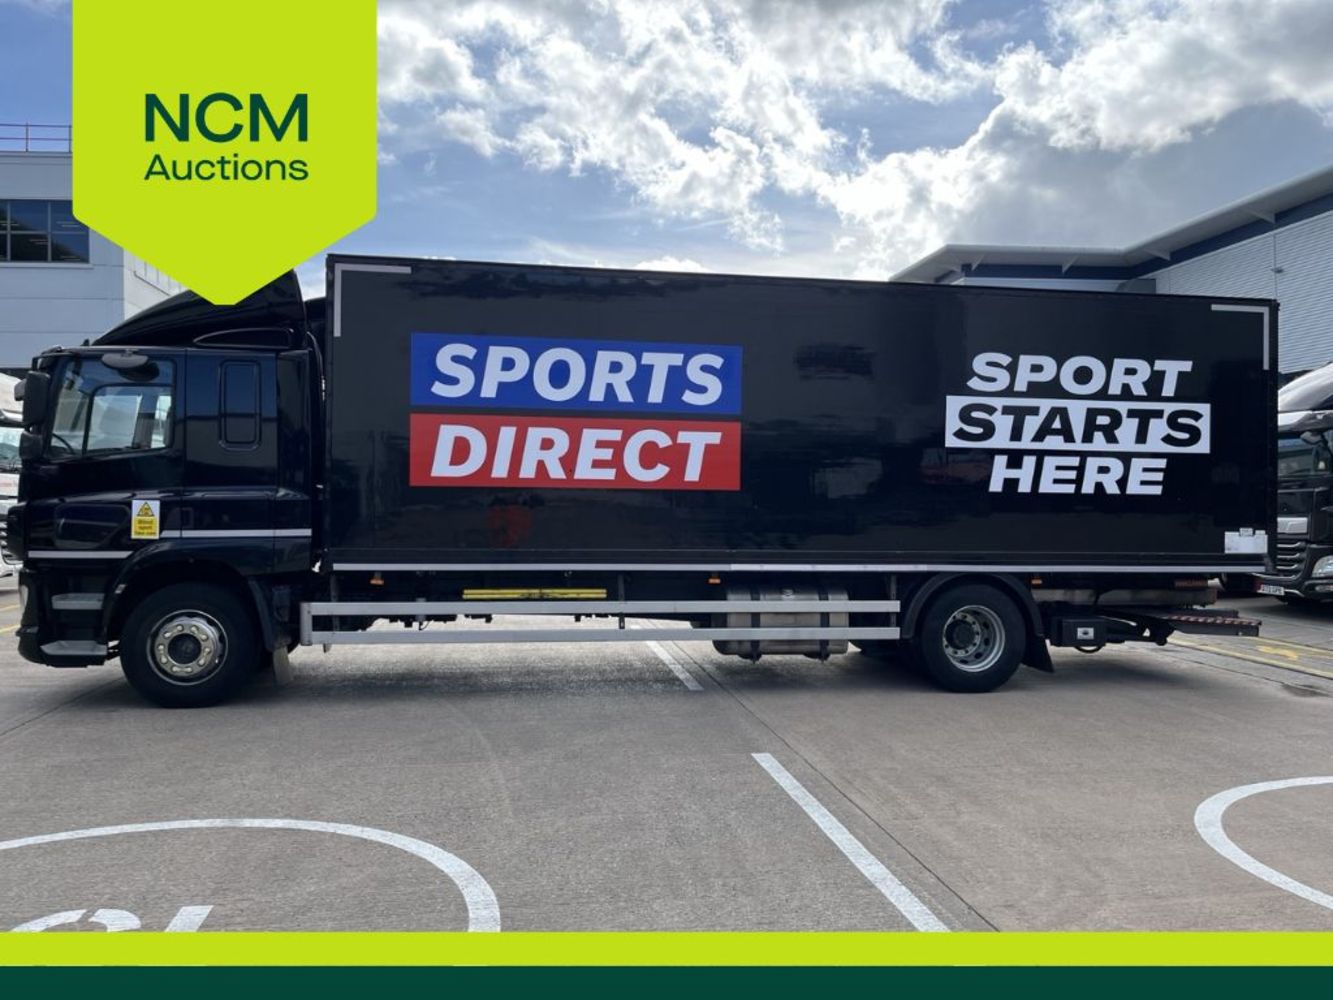 Plant, Machinery & Commercial Vehicles - Featuring 40ft High Cube Shipping Containers & Ex-Fleet, HGV's from Retained Client, SPORTS DIRECT.